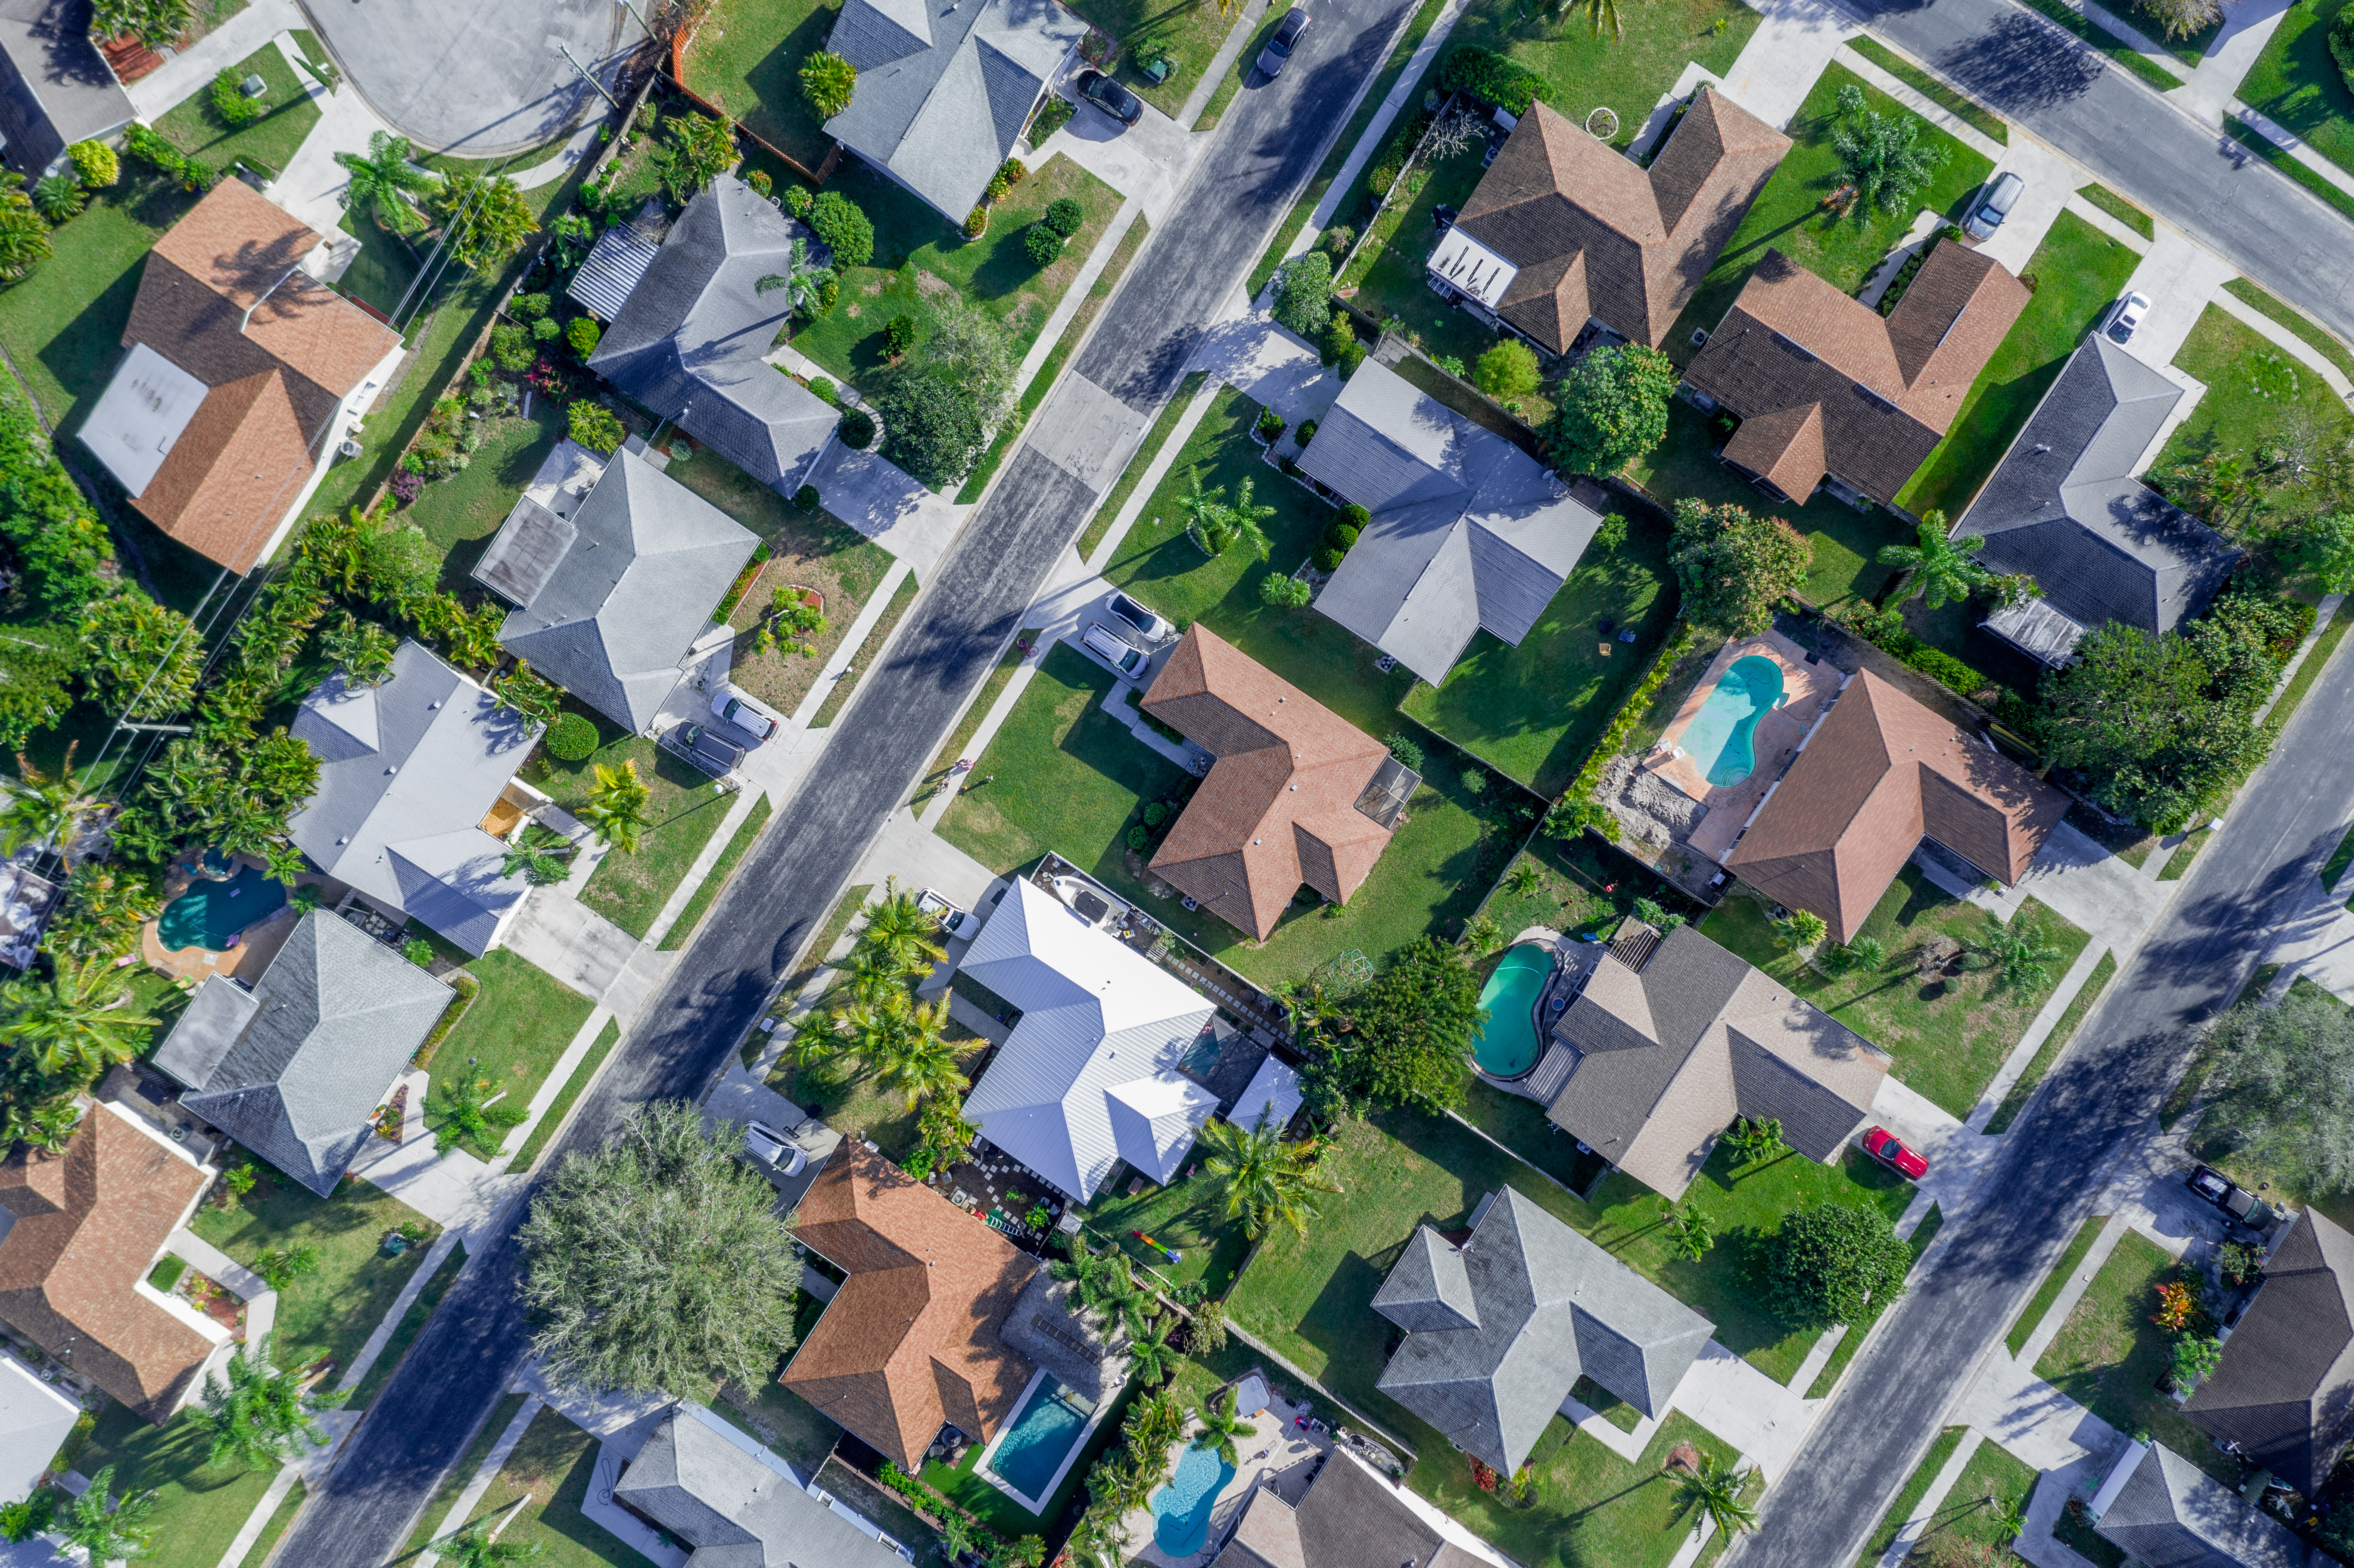 Bird's eye view of a suburb street with house roofs and bright green lawns  